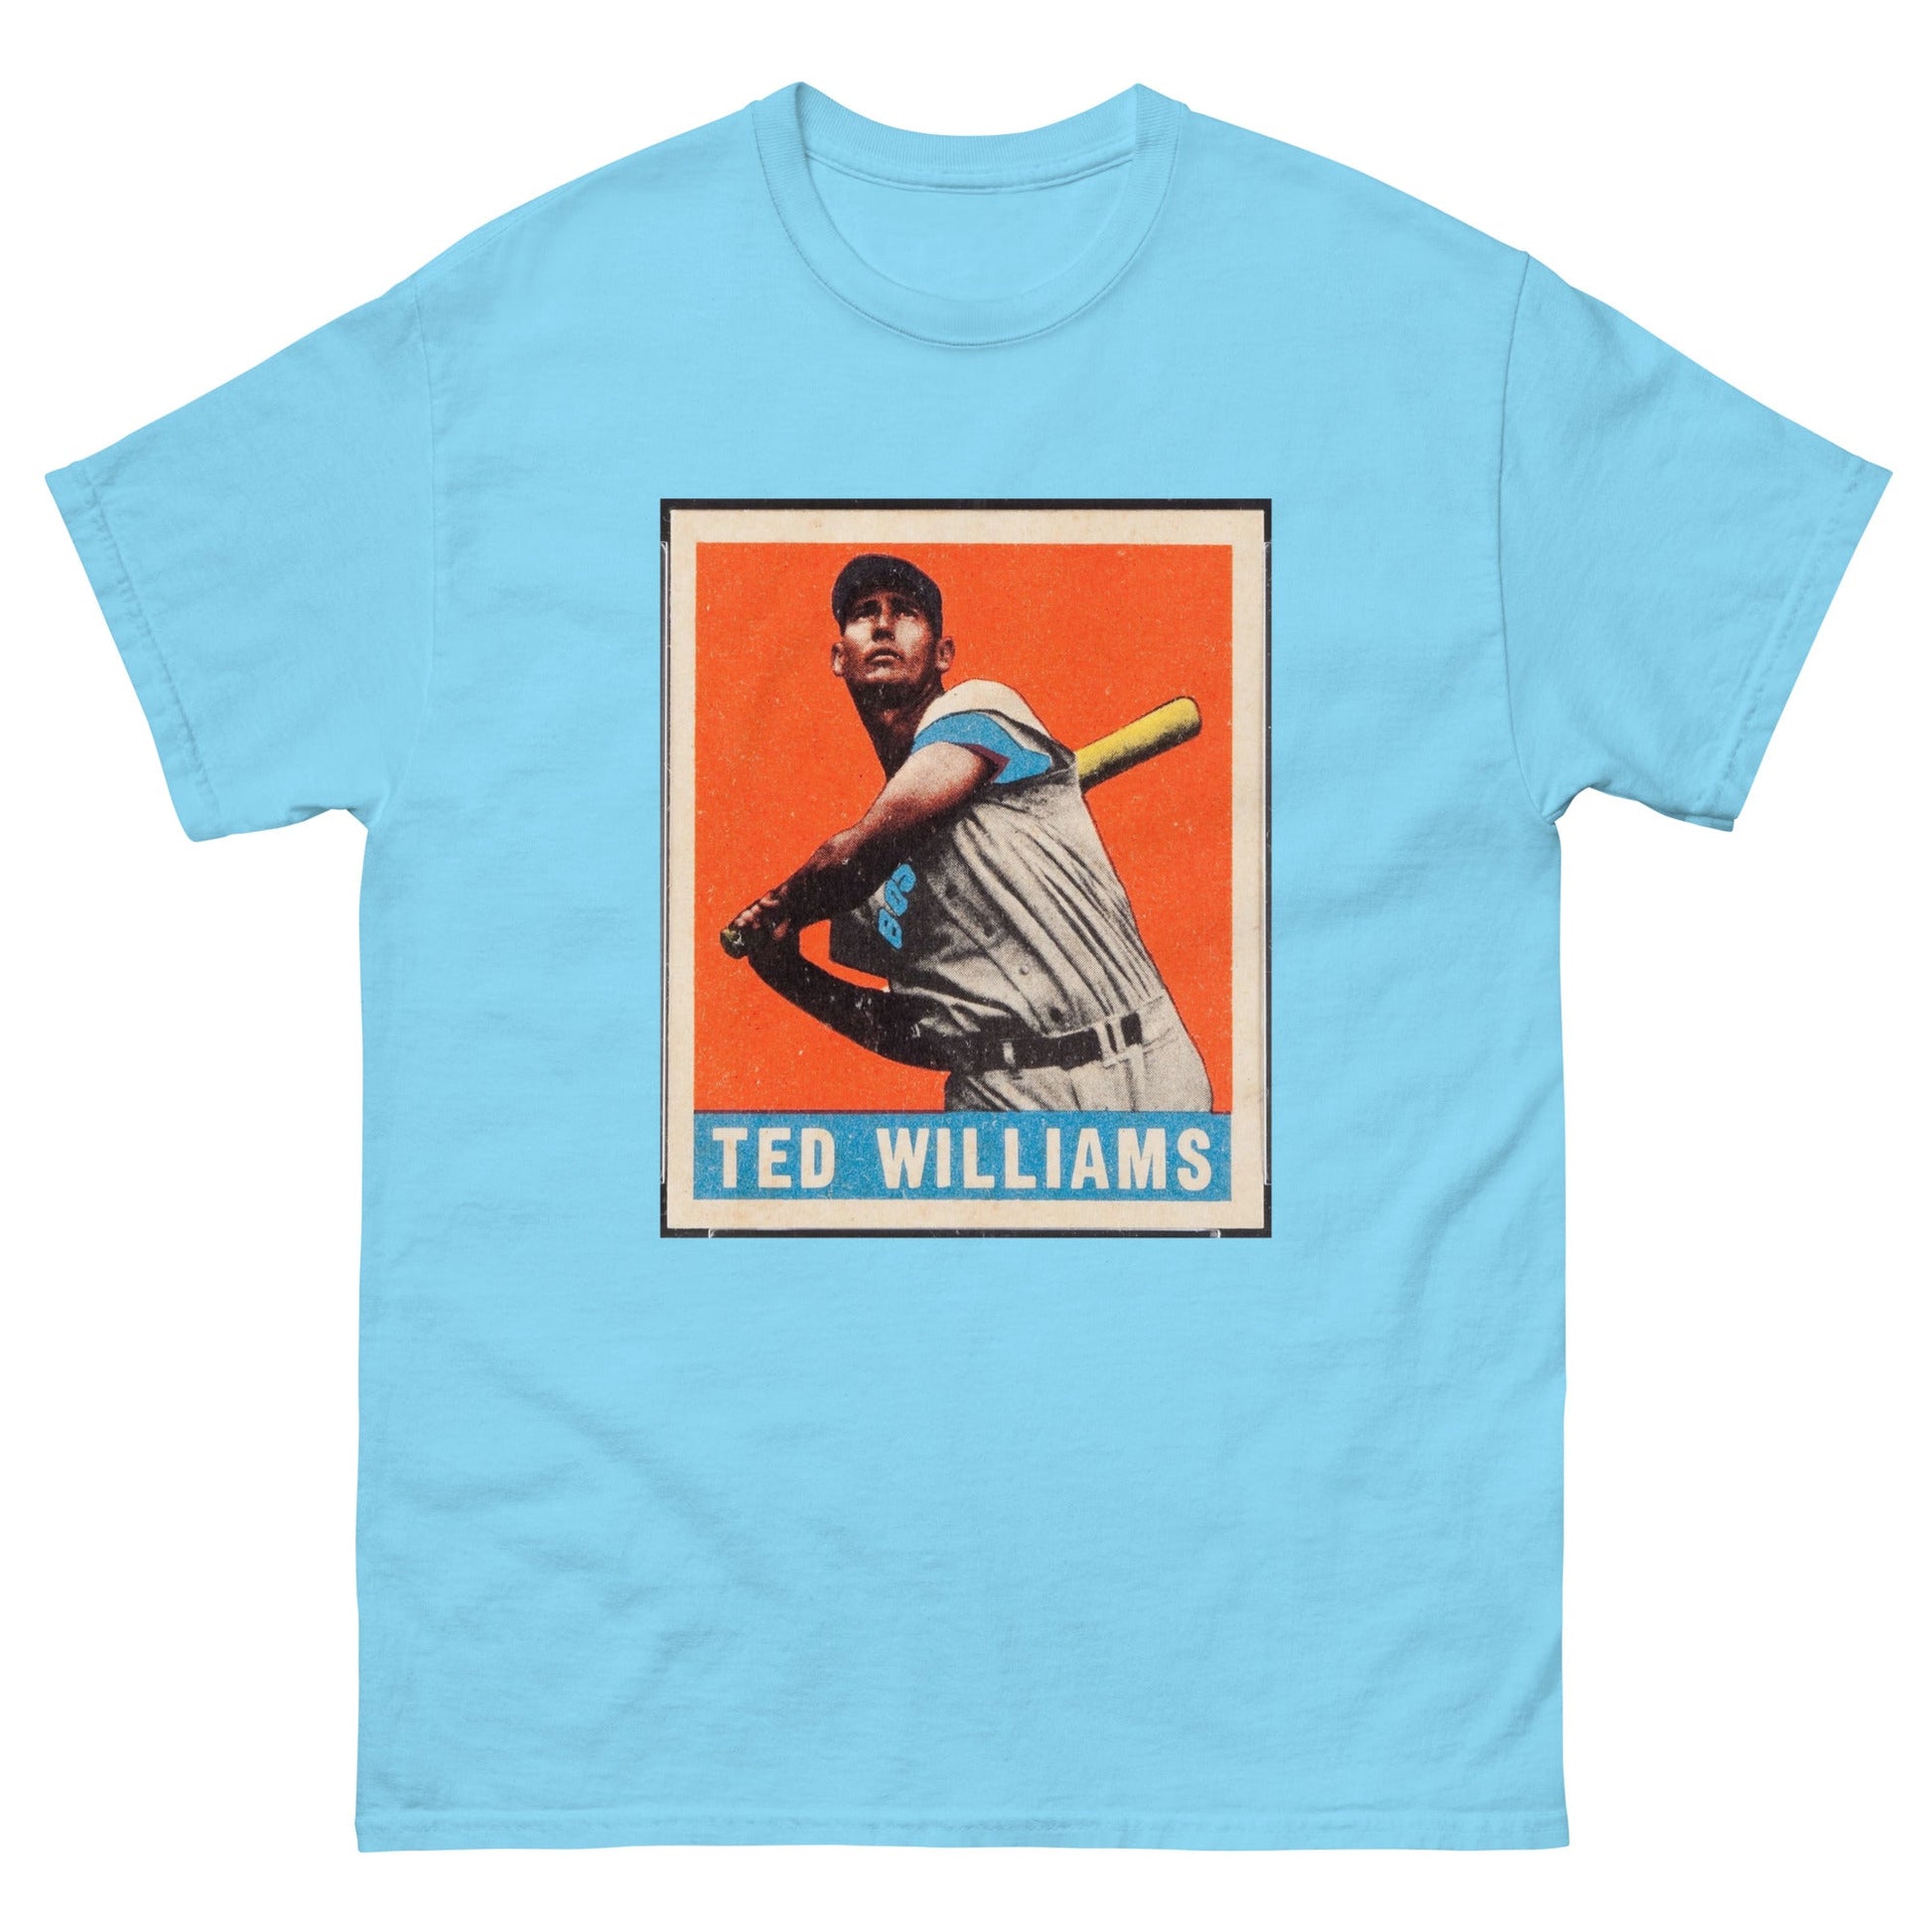 Ted Williams tee - One Small Step History